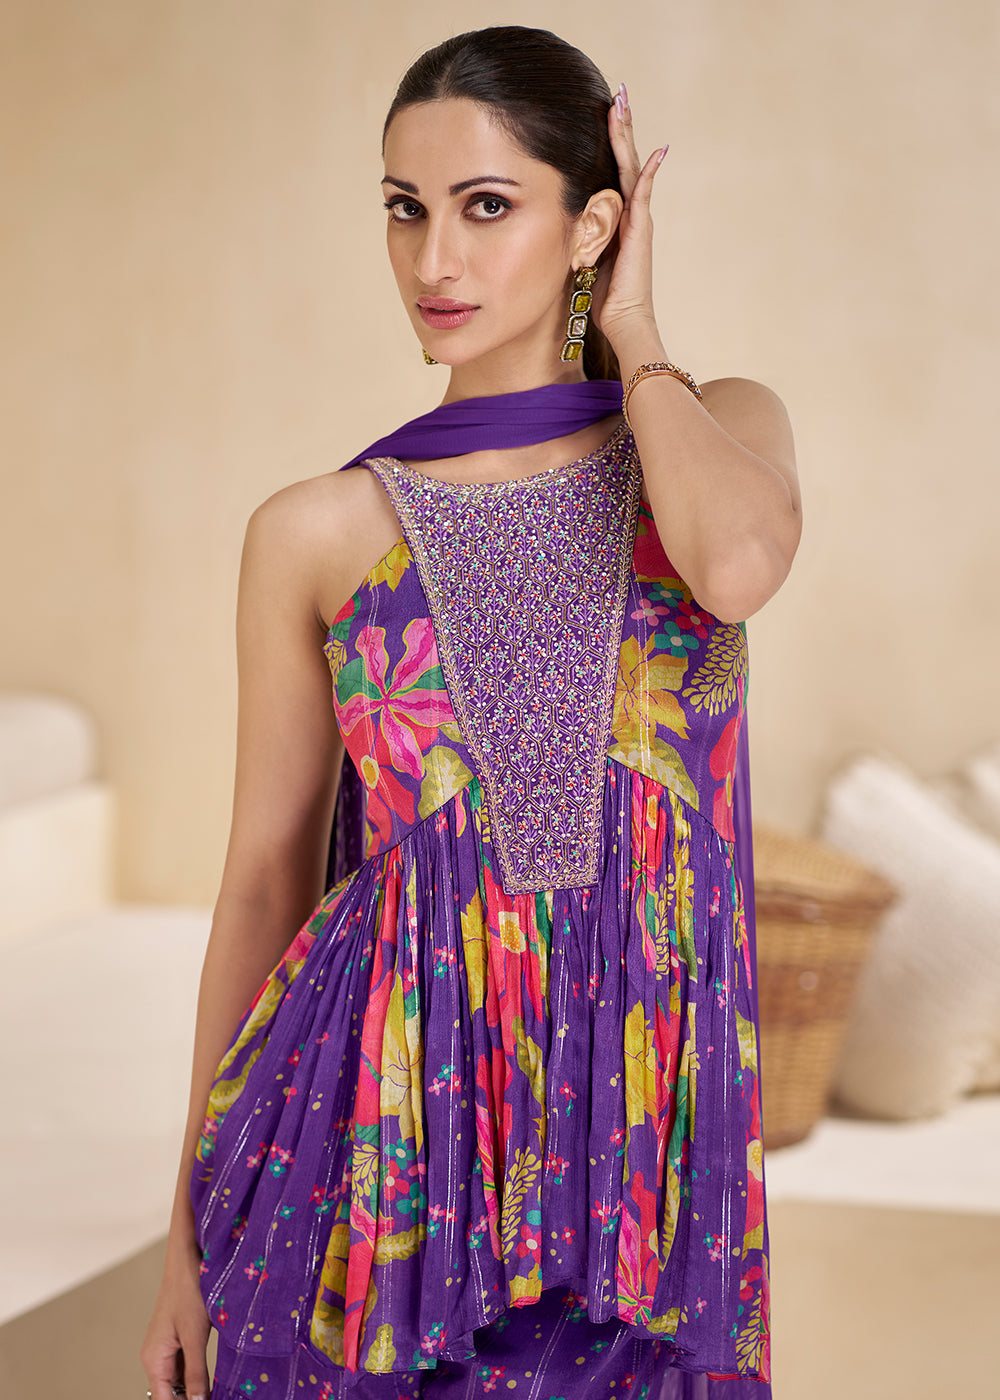 Shop Now Purple Digital Printed & Embroidered Party Style Sharara Suit Online at Empress Clothing in USA, UK, Canada, Italy & Worldwide.'